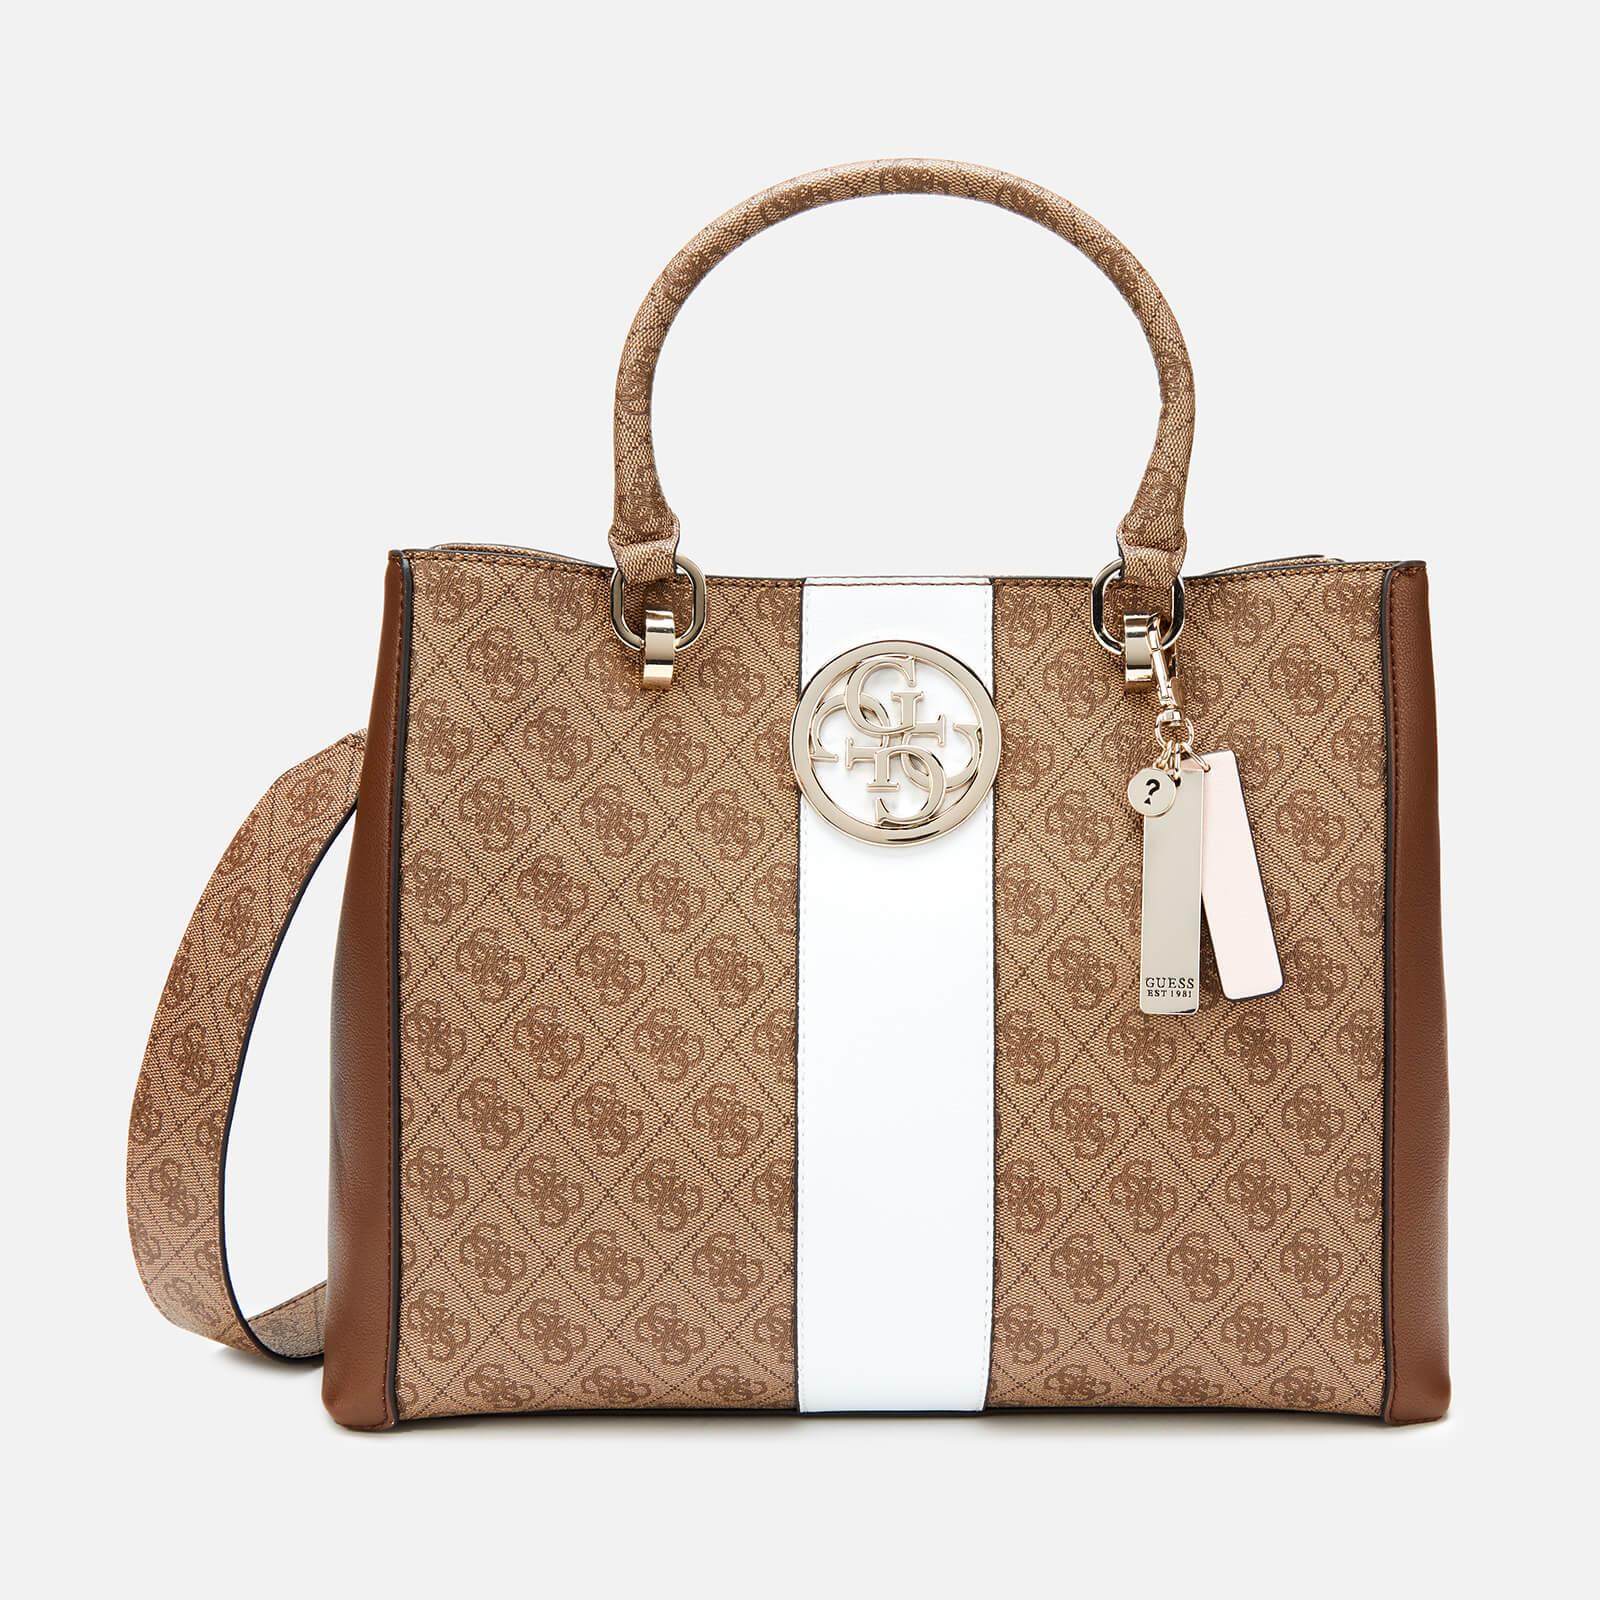 Guess Bluebelle Carryall Bag in Brown - Lyst